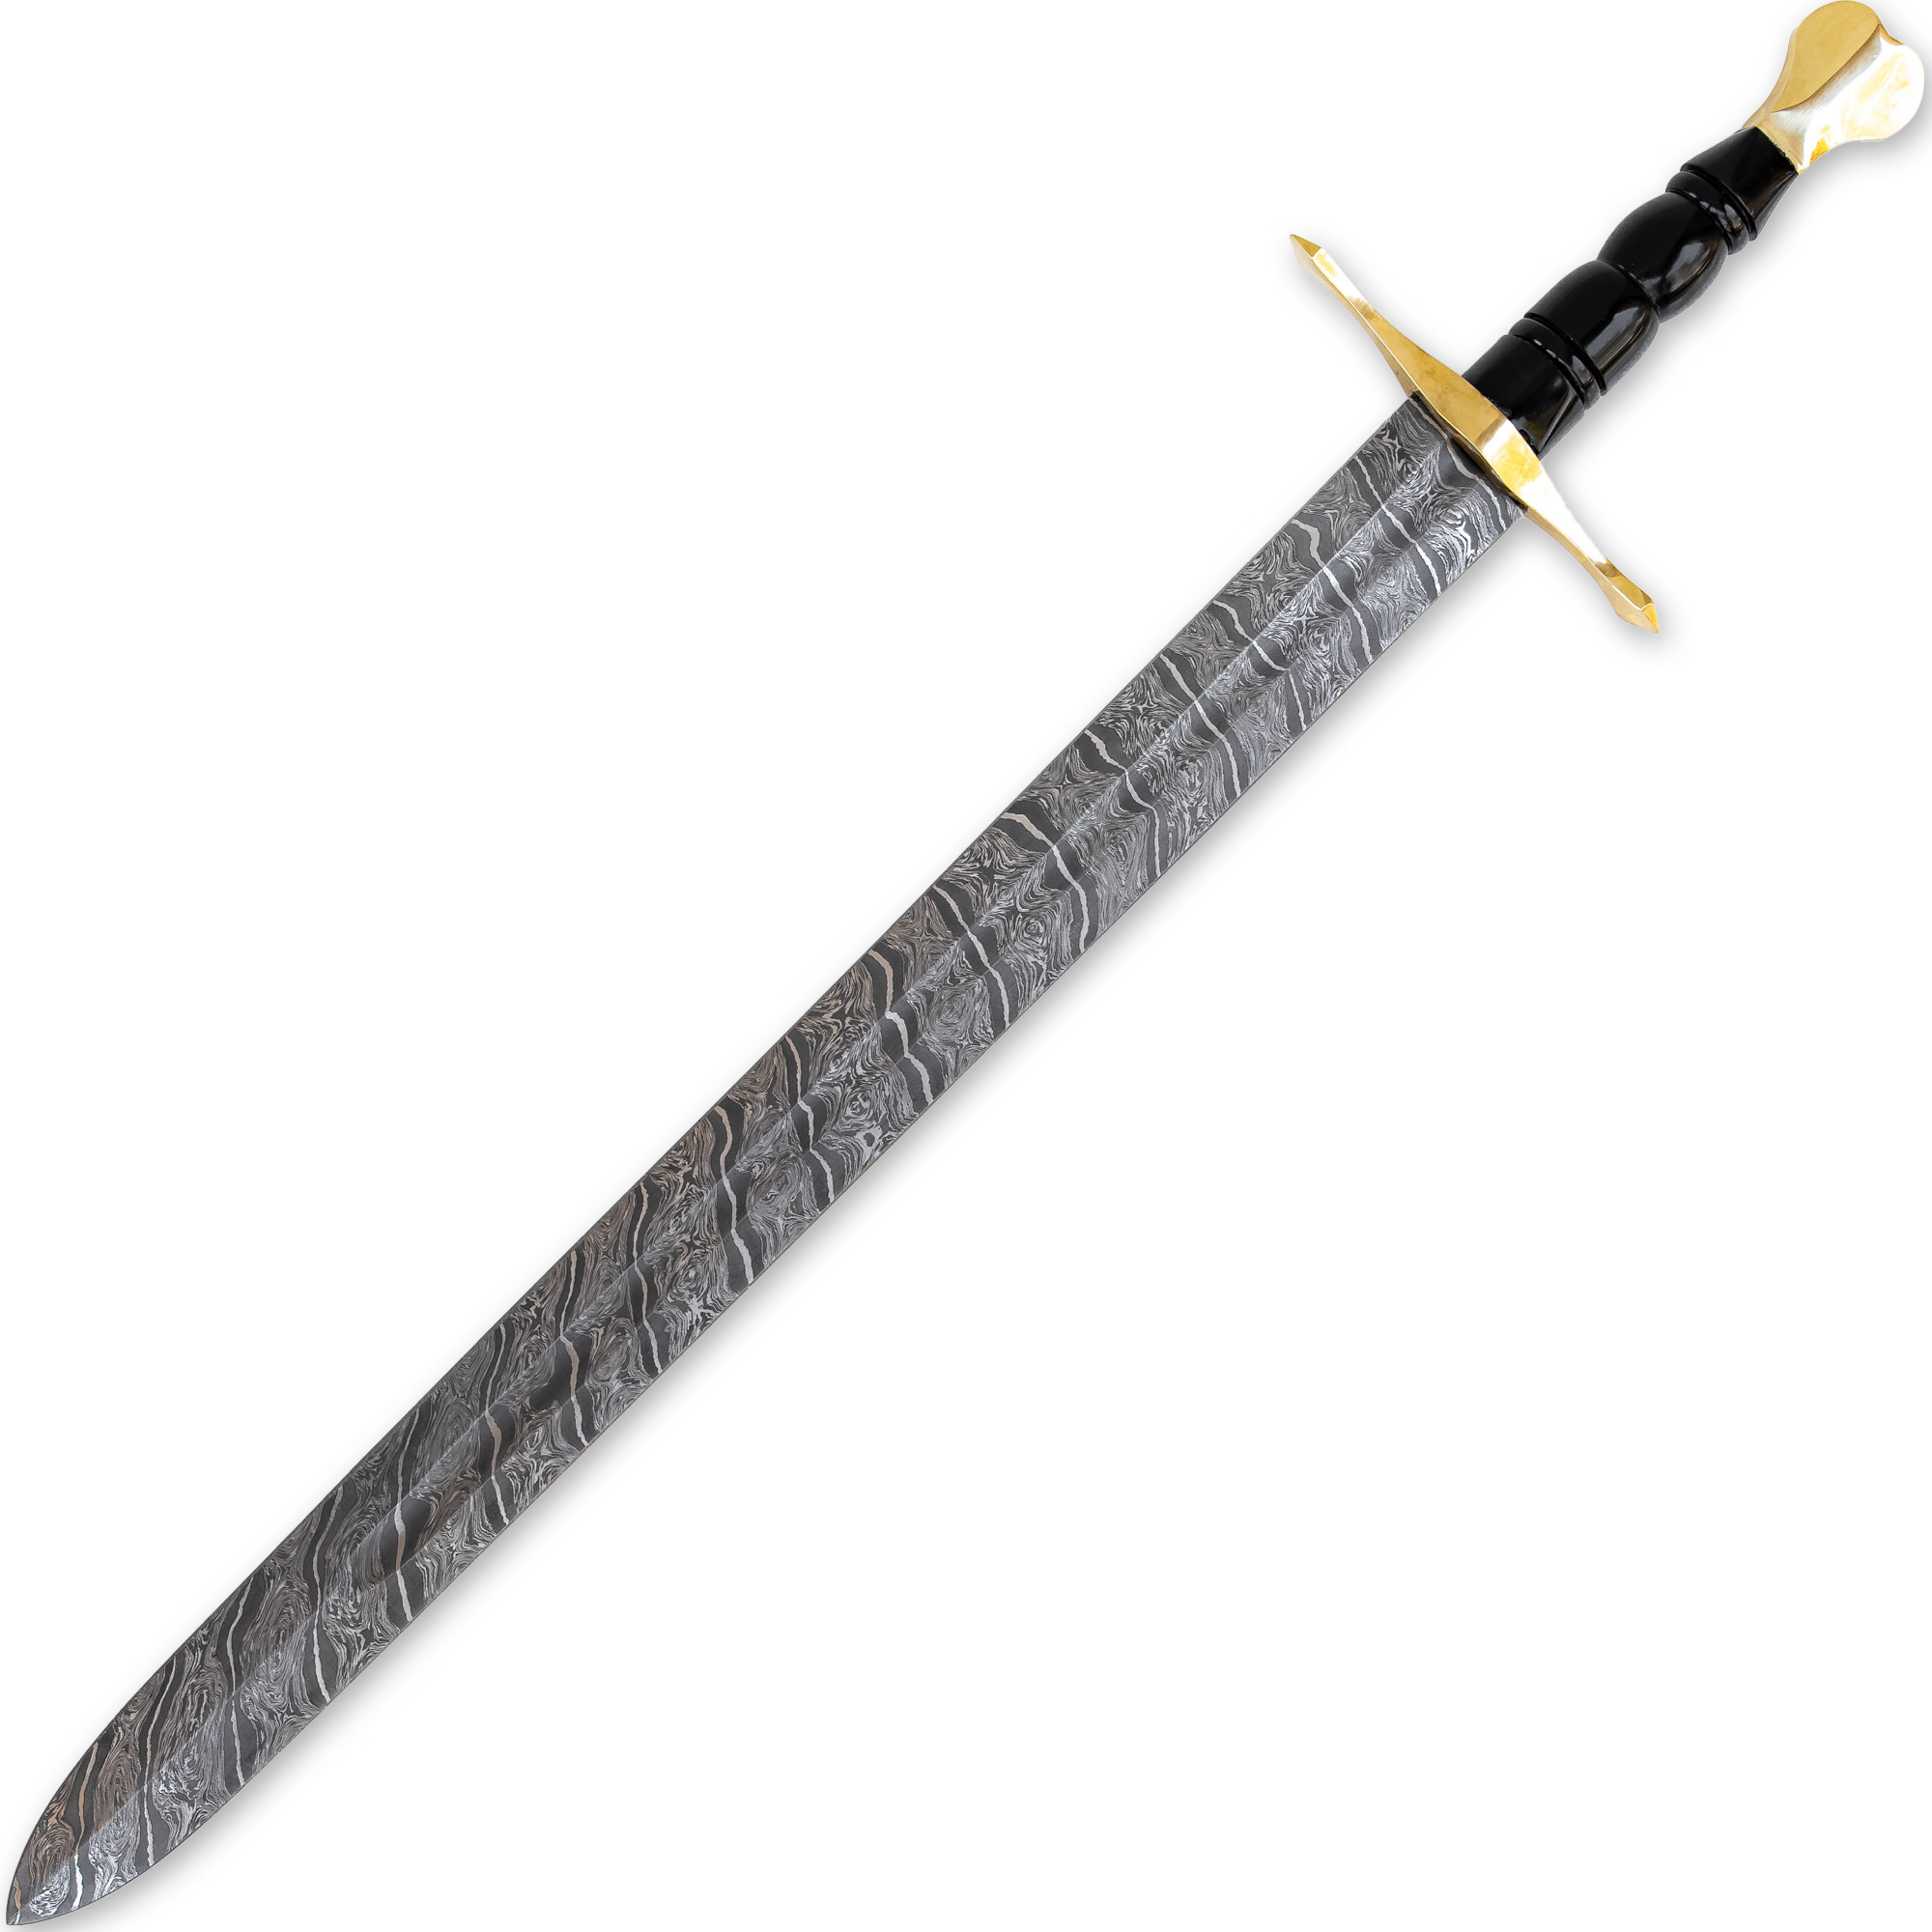 Jewel of the Nation Medieval European Damascus Steel Arming SWORD with Sheath